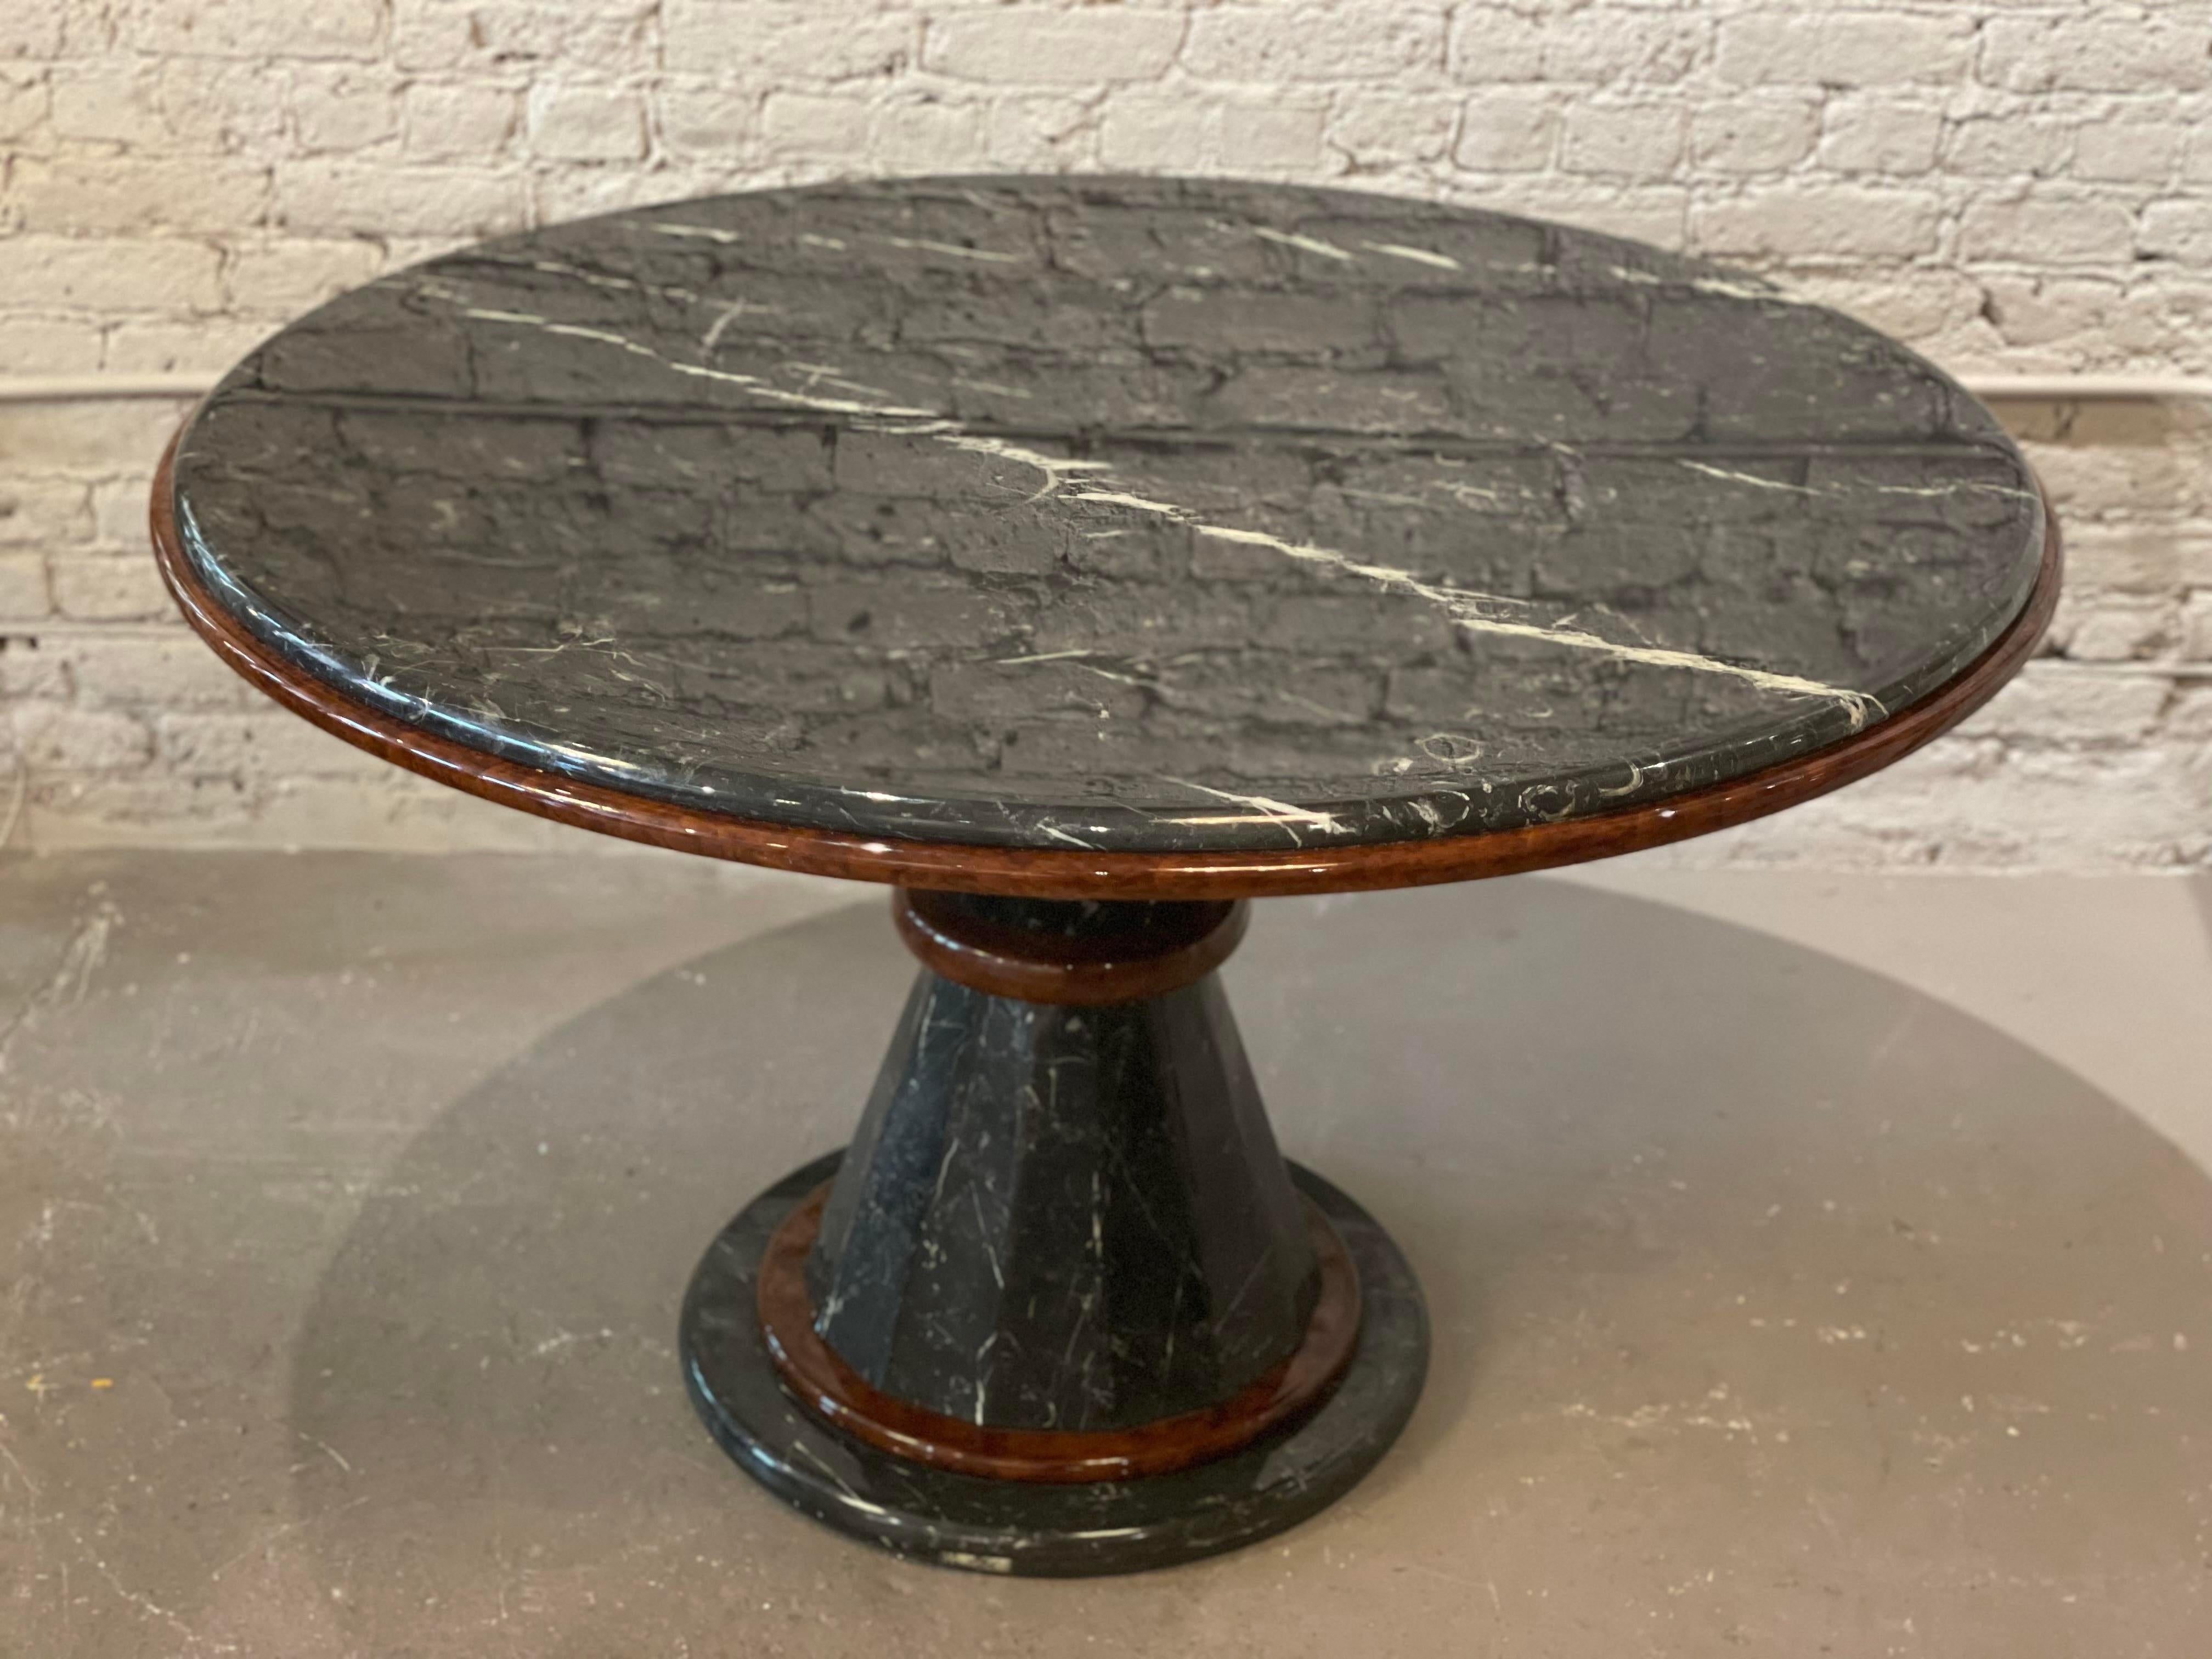 Beautiful table in excellent condition. The mahogany wood accents takes this classic marble table into a different sphere. The channeled base narrows at the center. Perfect for dining (4 to 5 chairs) or an entry table with huge flowers on it!
 